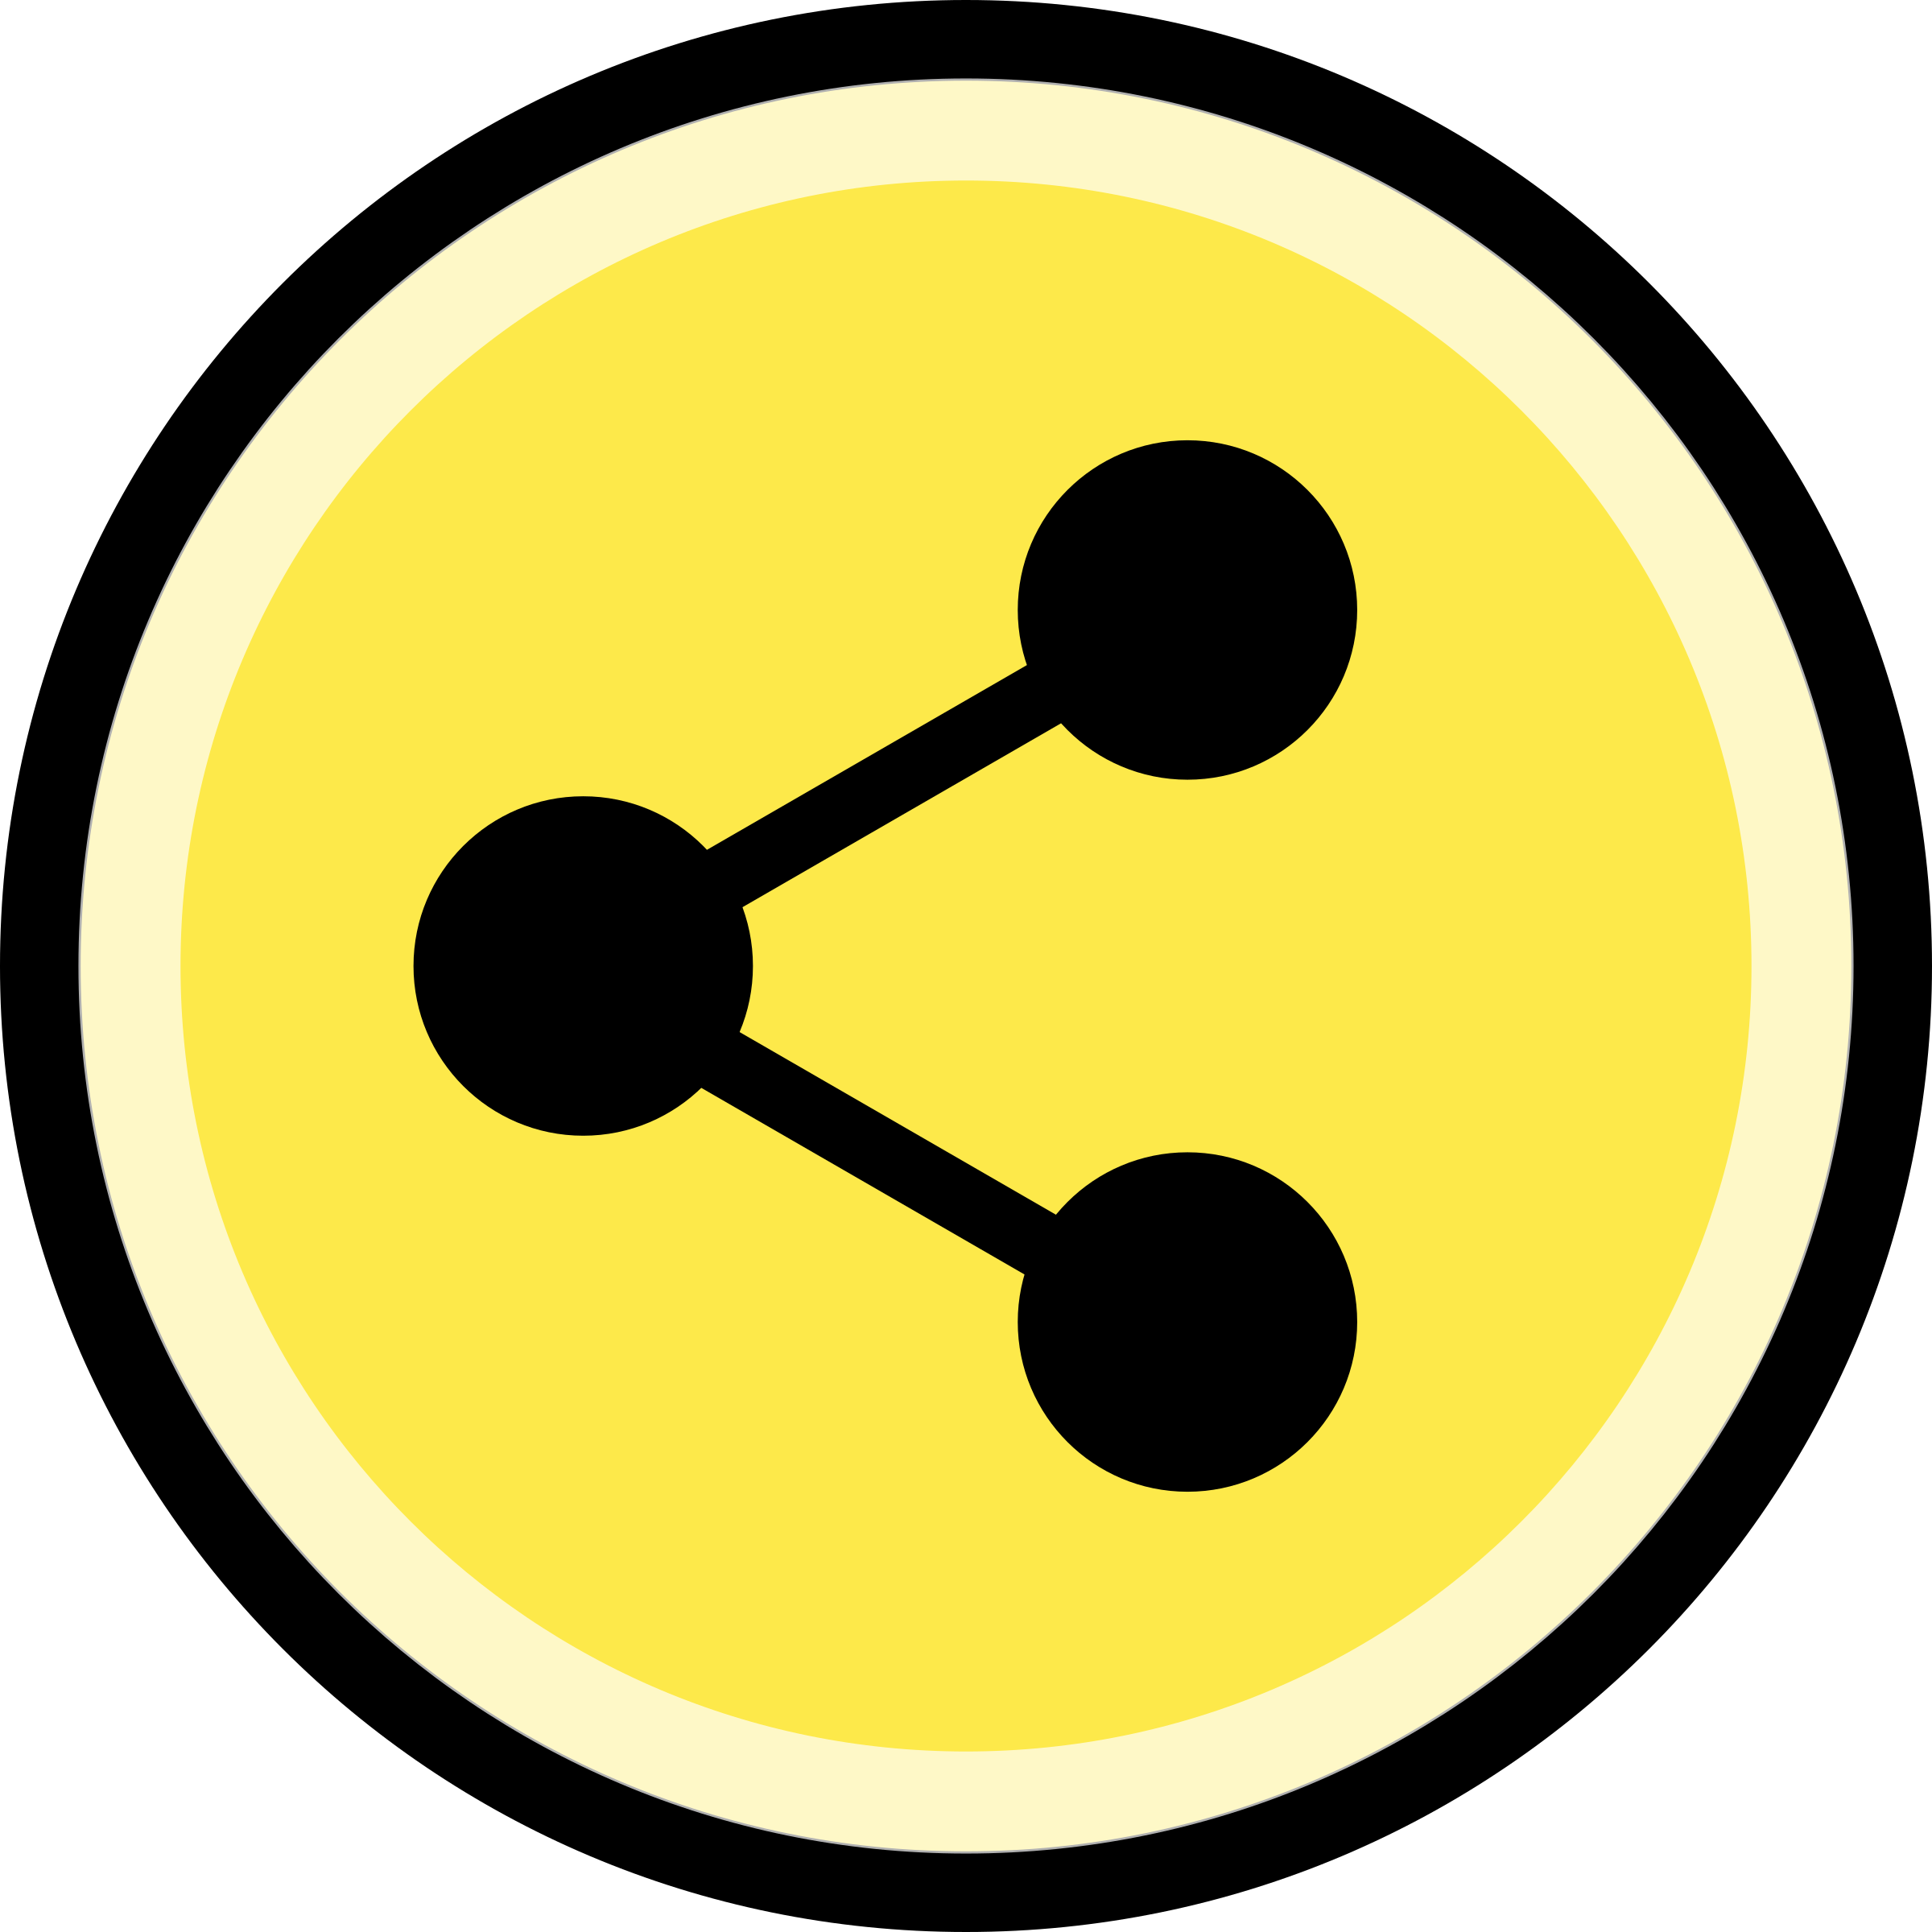 Share - Share Button Yellow Png (2400x2400)